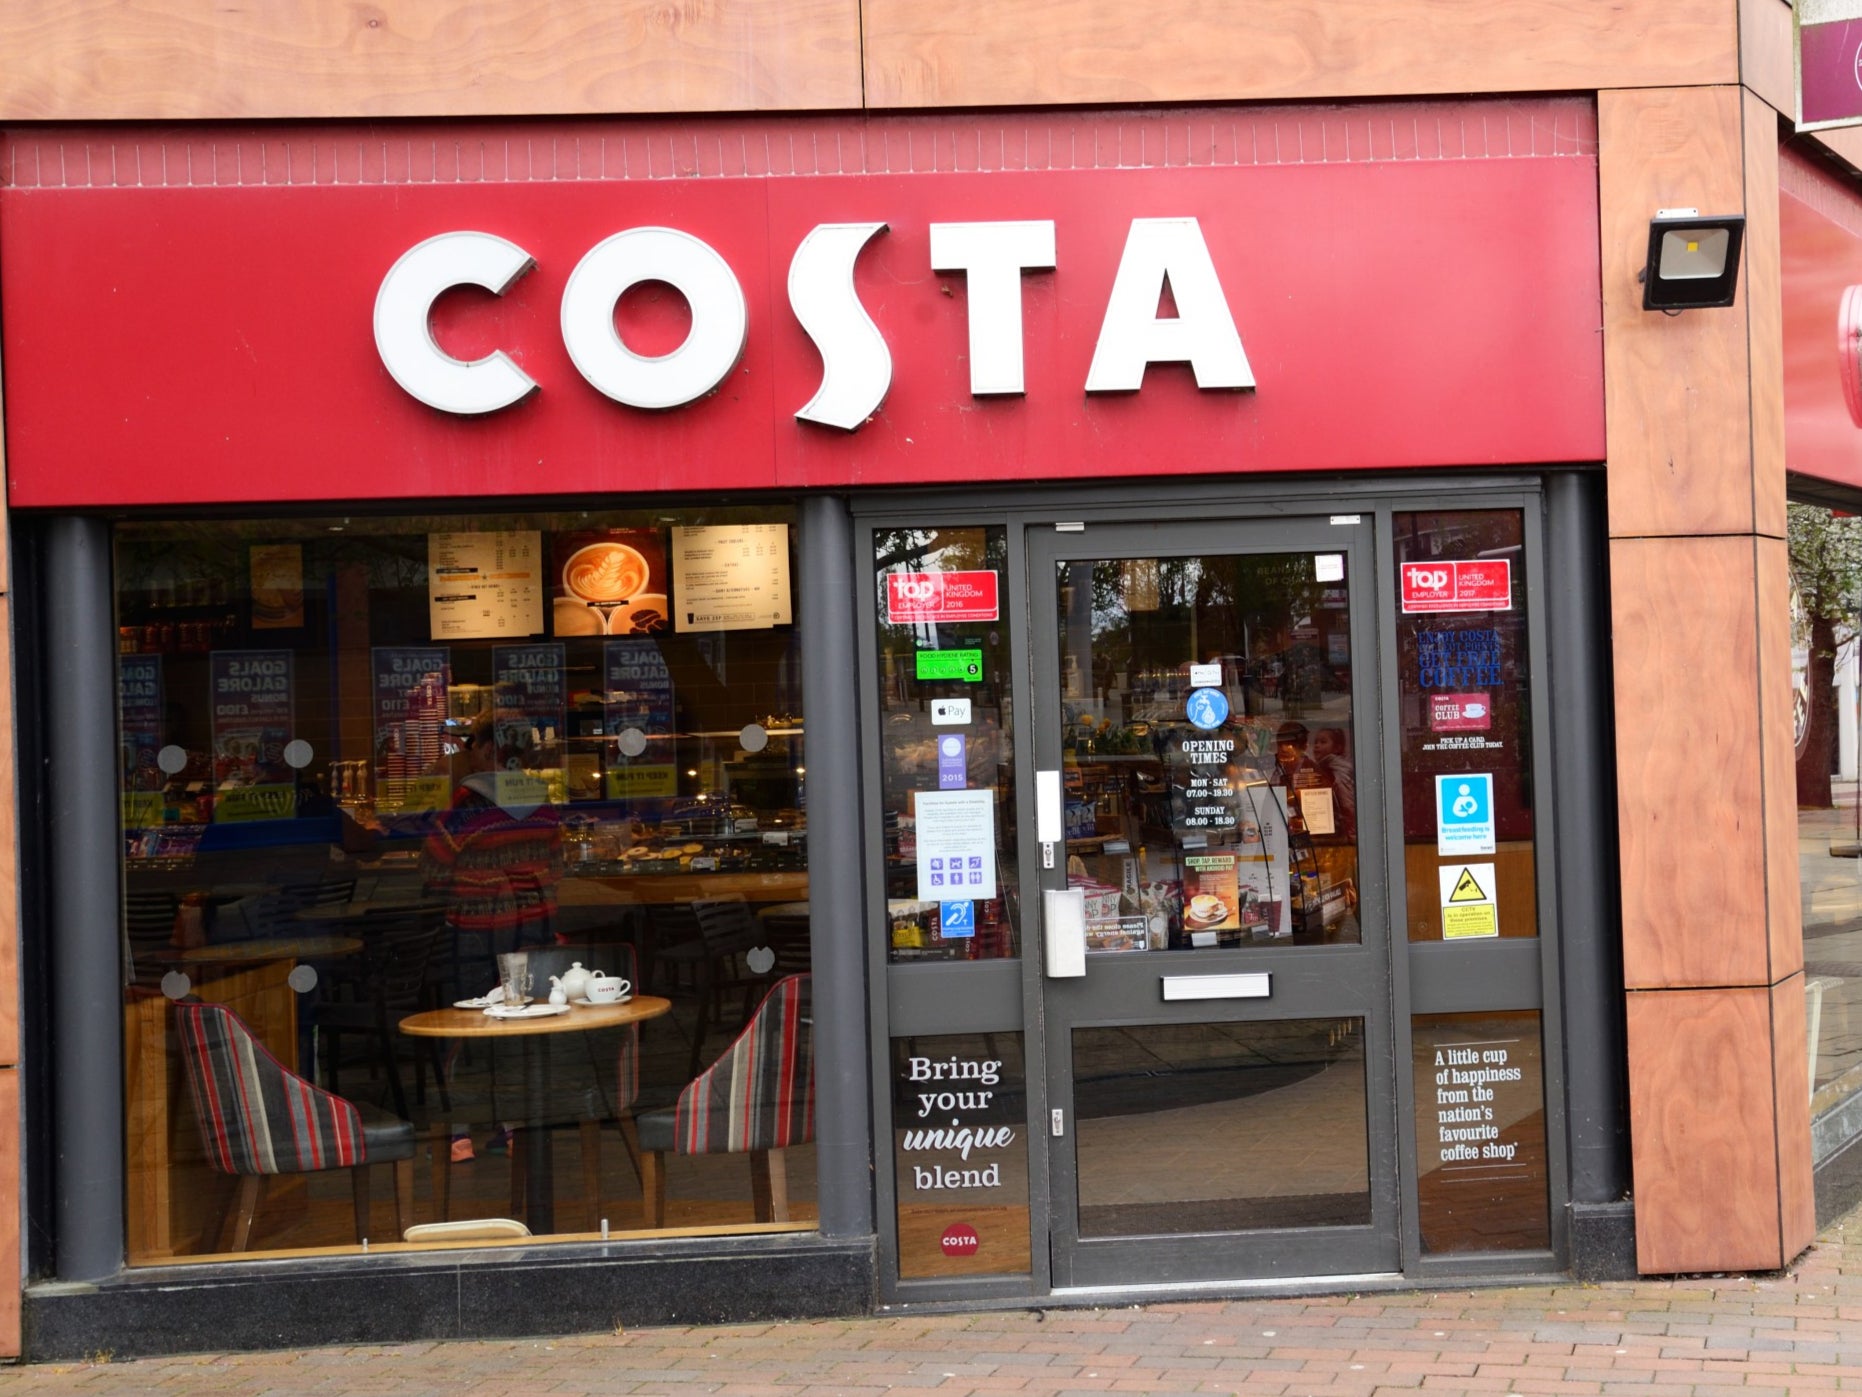 As of 3 September, coffee chain Costa has incurred 1,650 losses